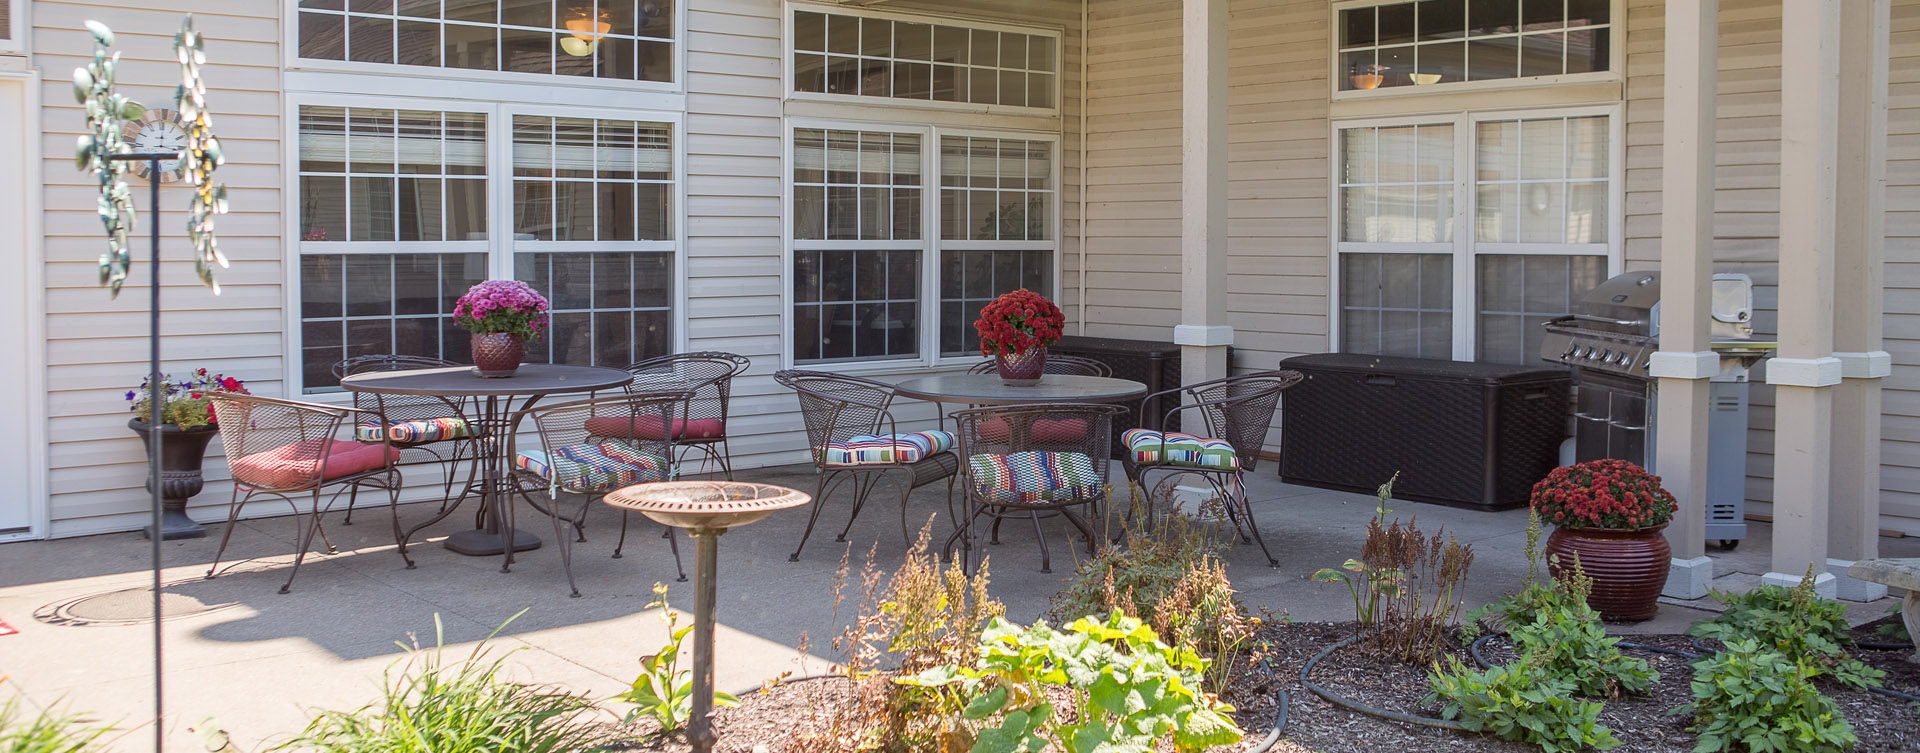 Enjoy the outdoors in a whole new light by stepping into our secure courtyard at Bickford of Davenport